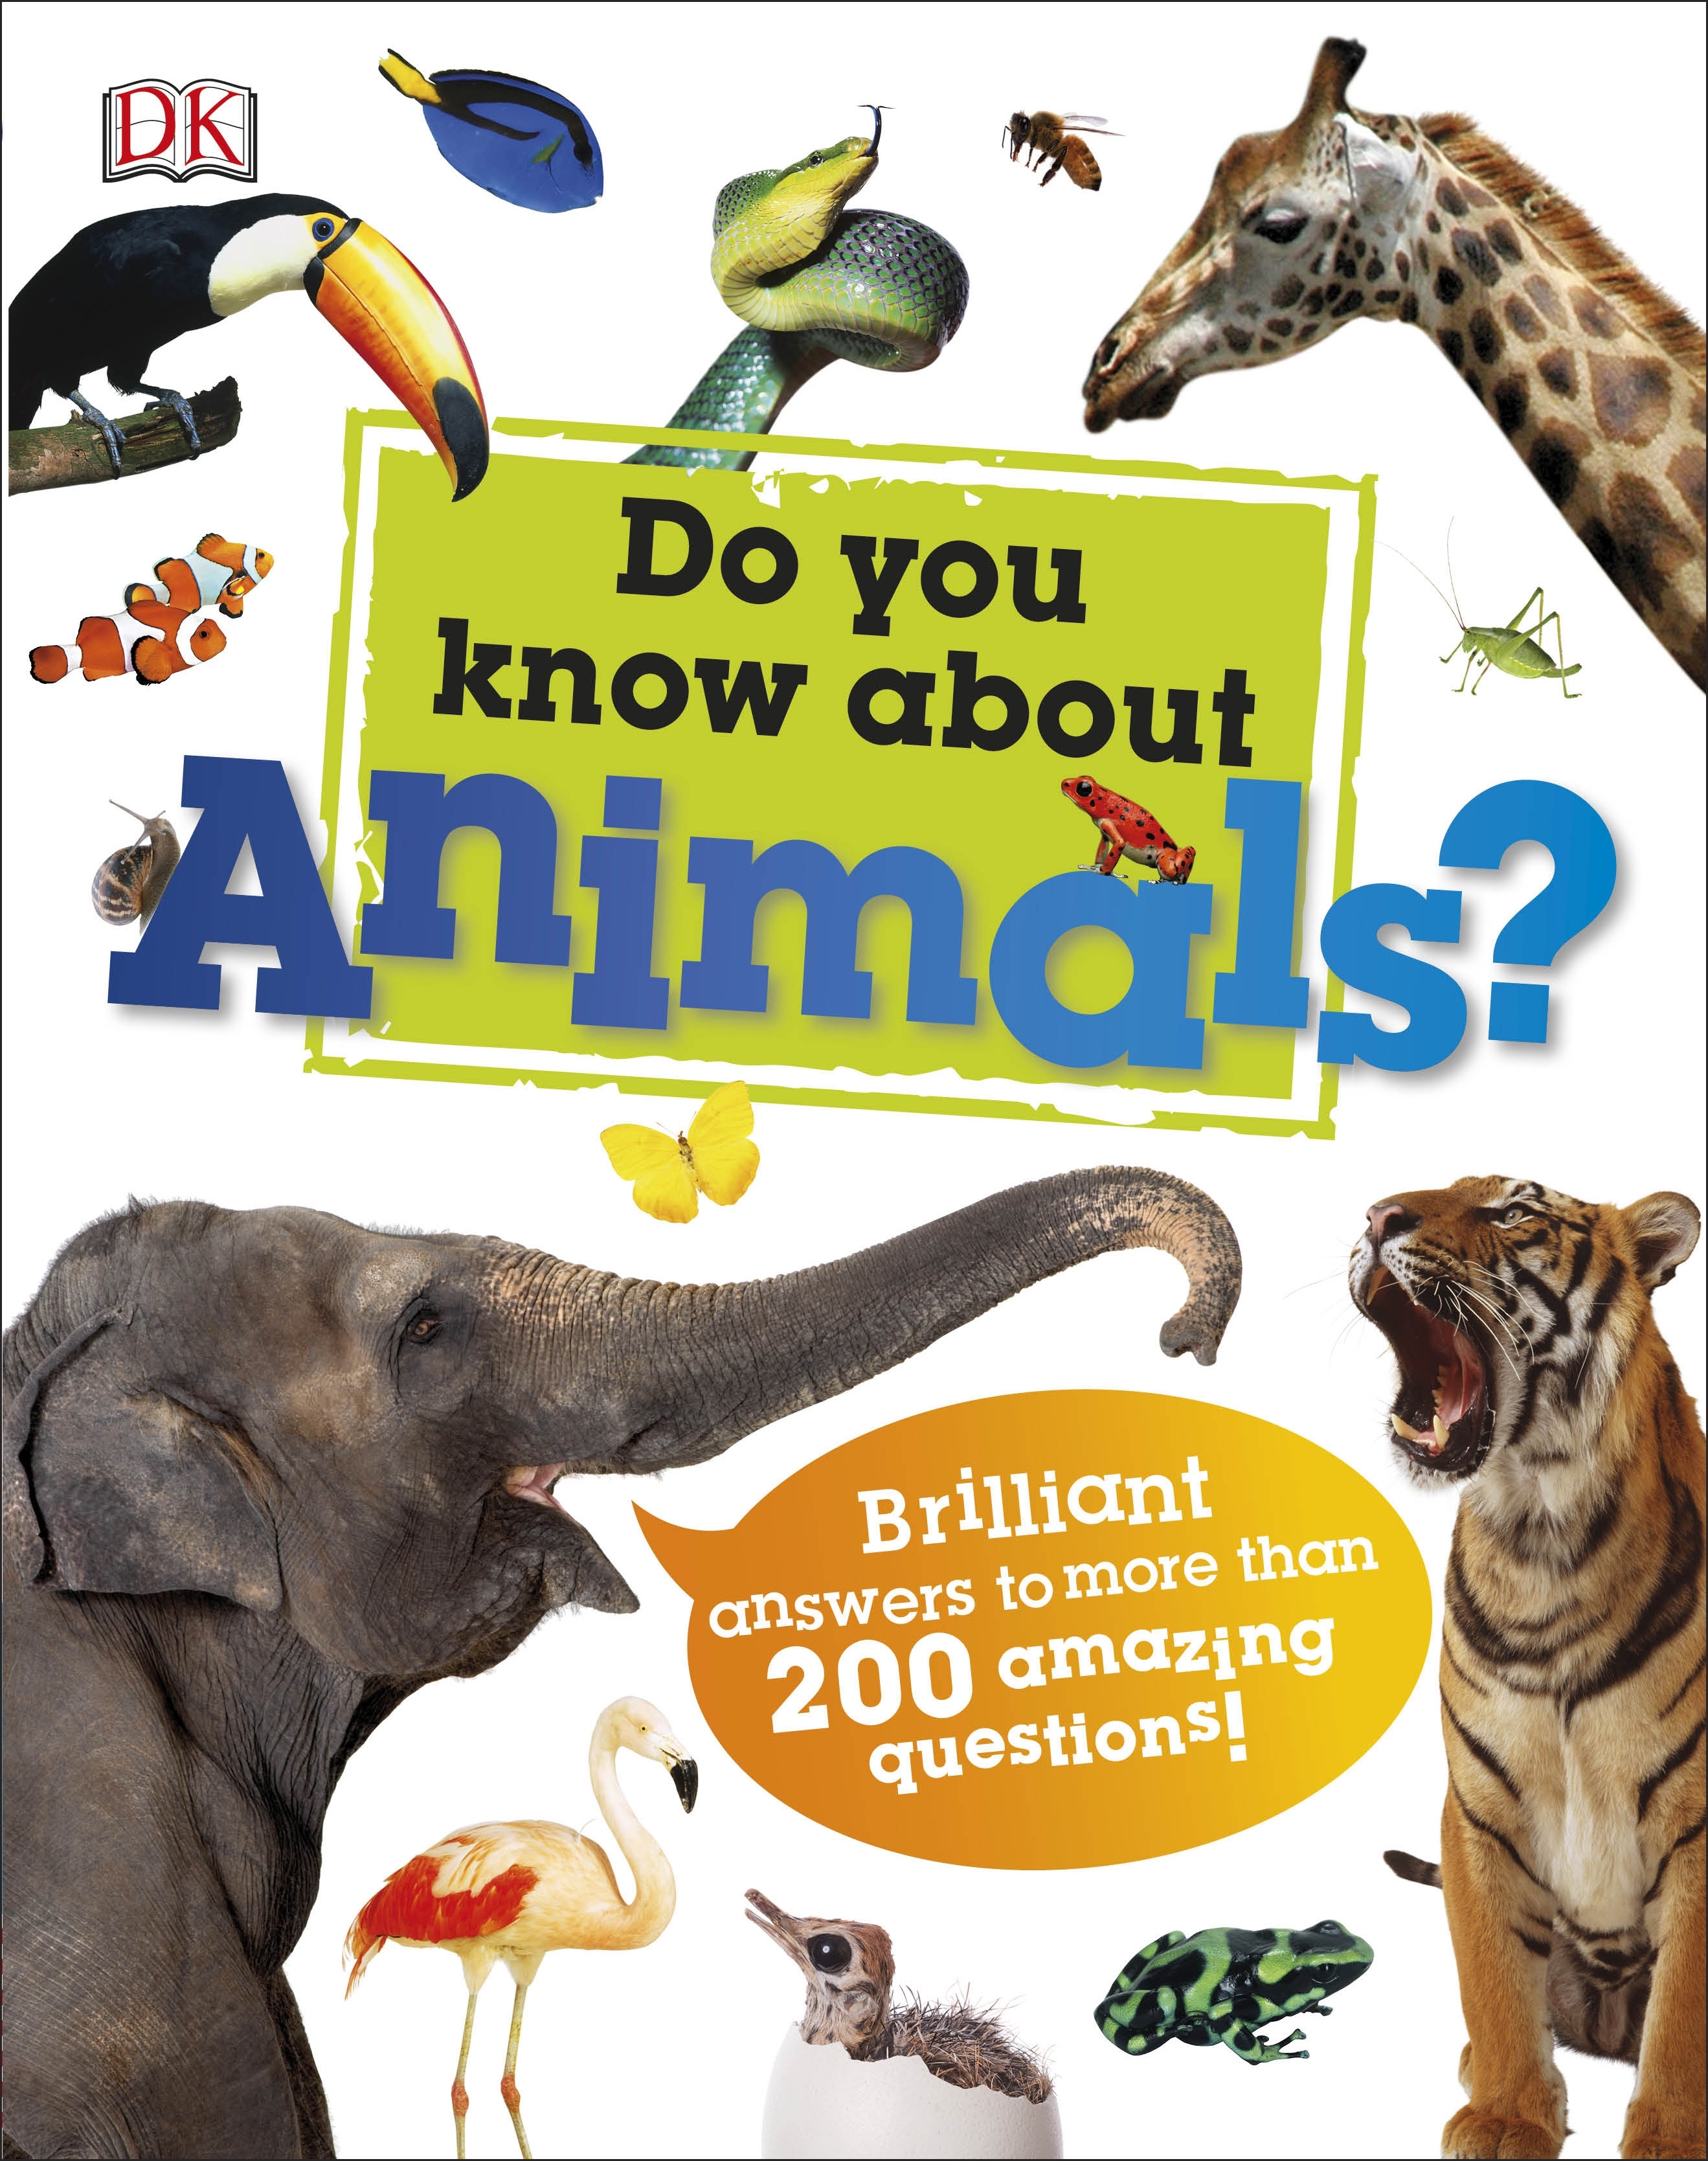 Do You Know About Animals? by DK - Penguin Books Australia